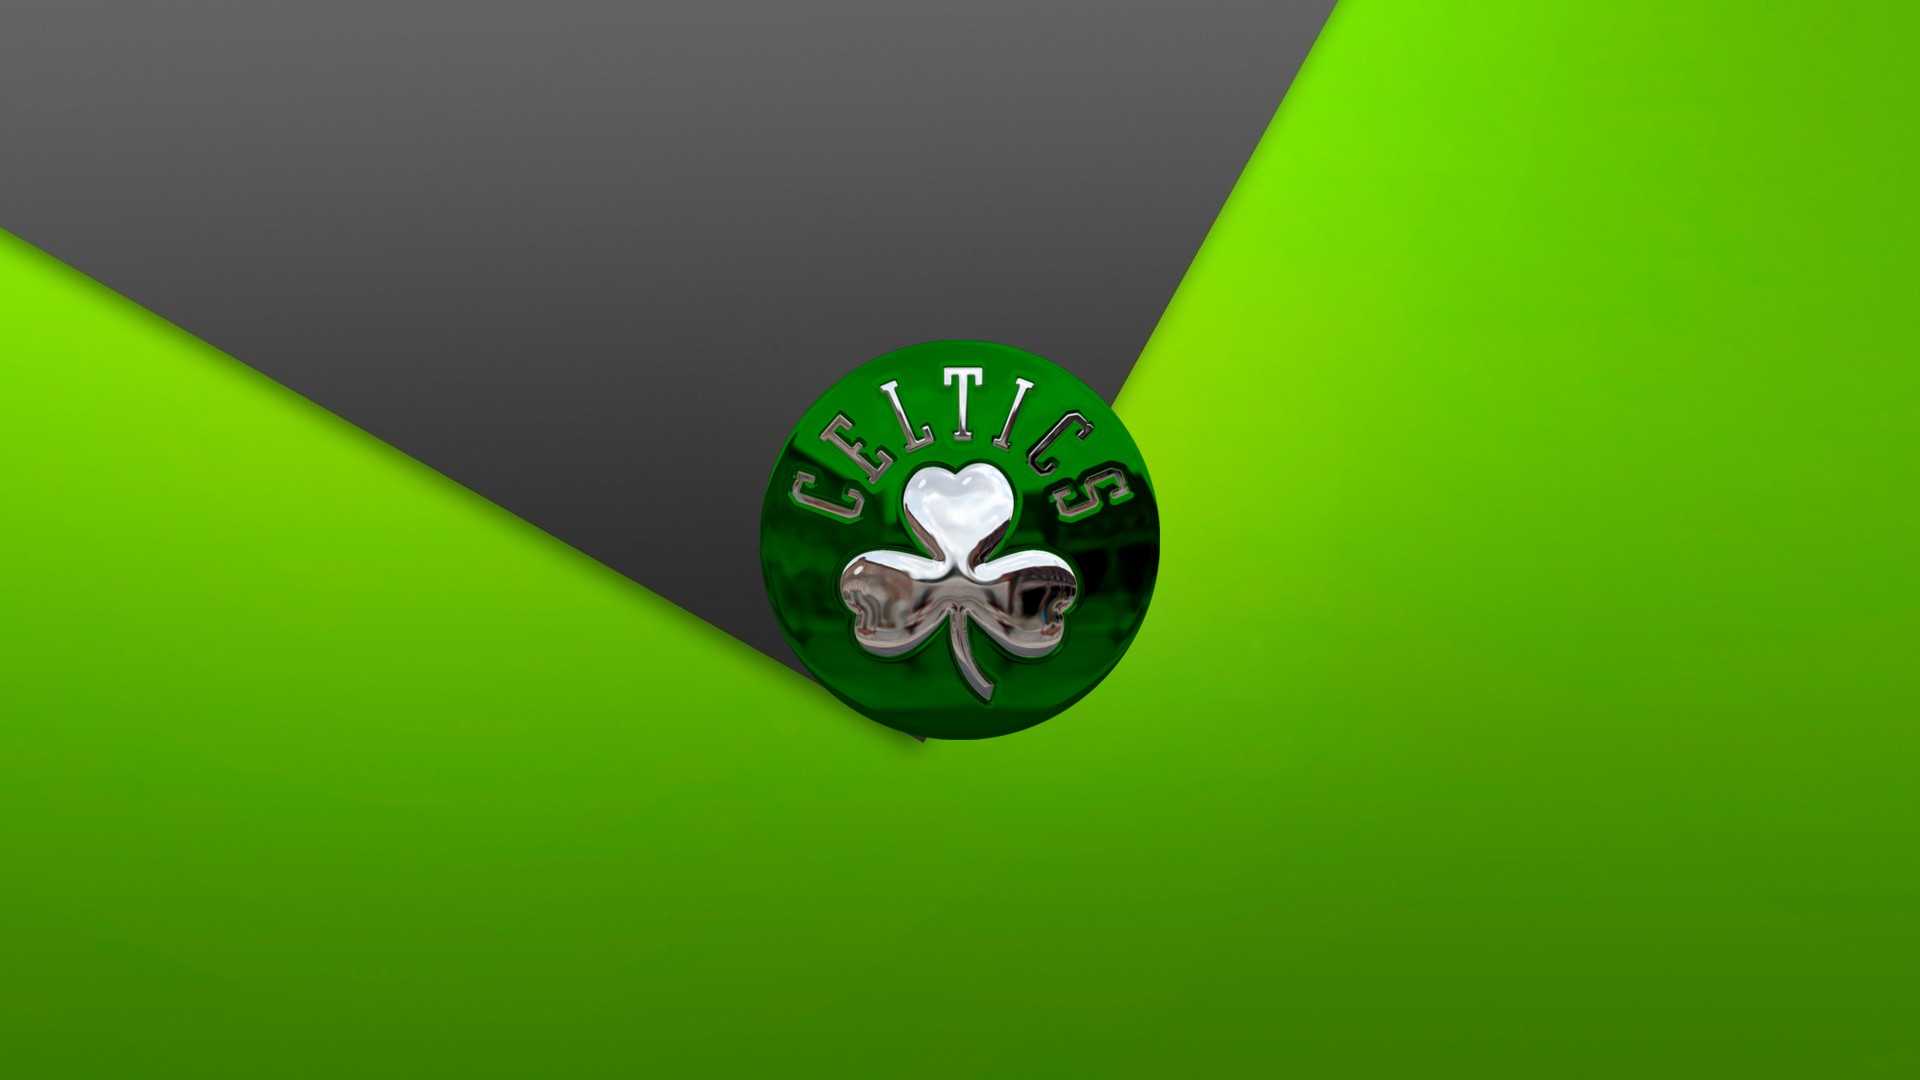 Boston Celtics Logo For Desktop Wallpaper with image dimensions 1920x1080 pixel. You can make this wallpaper for your Desktop Computer Backgrounds, Windows or Mac Screensavers, iPhone Lock screen, Tablet or Android and another Mobile Phone device